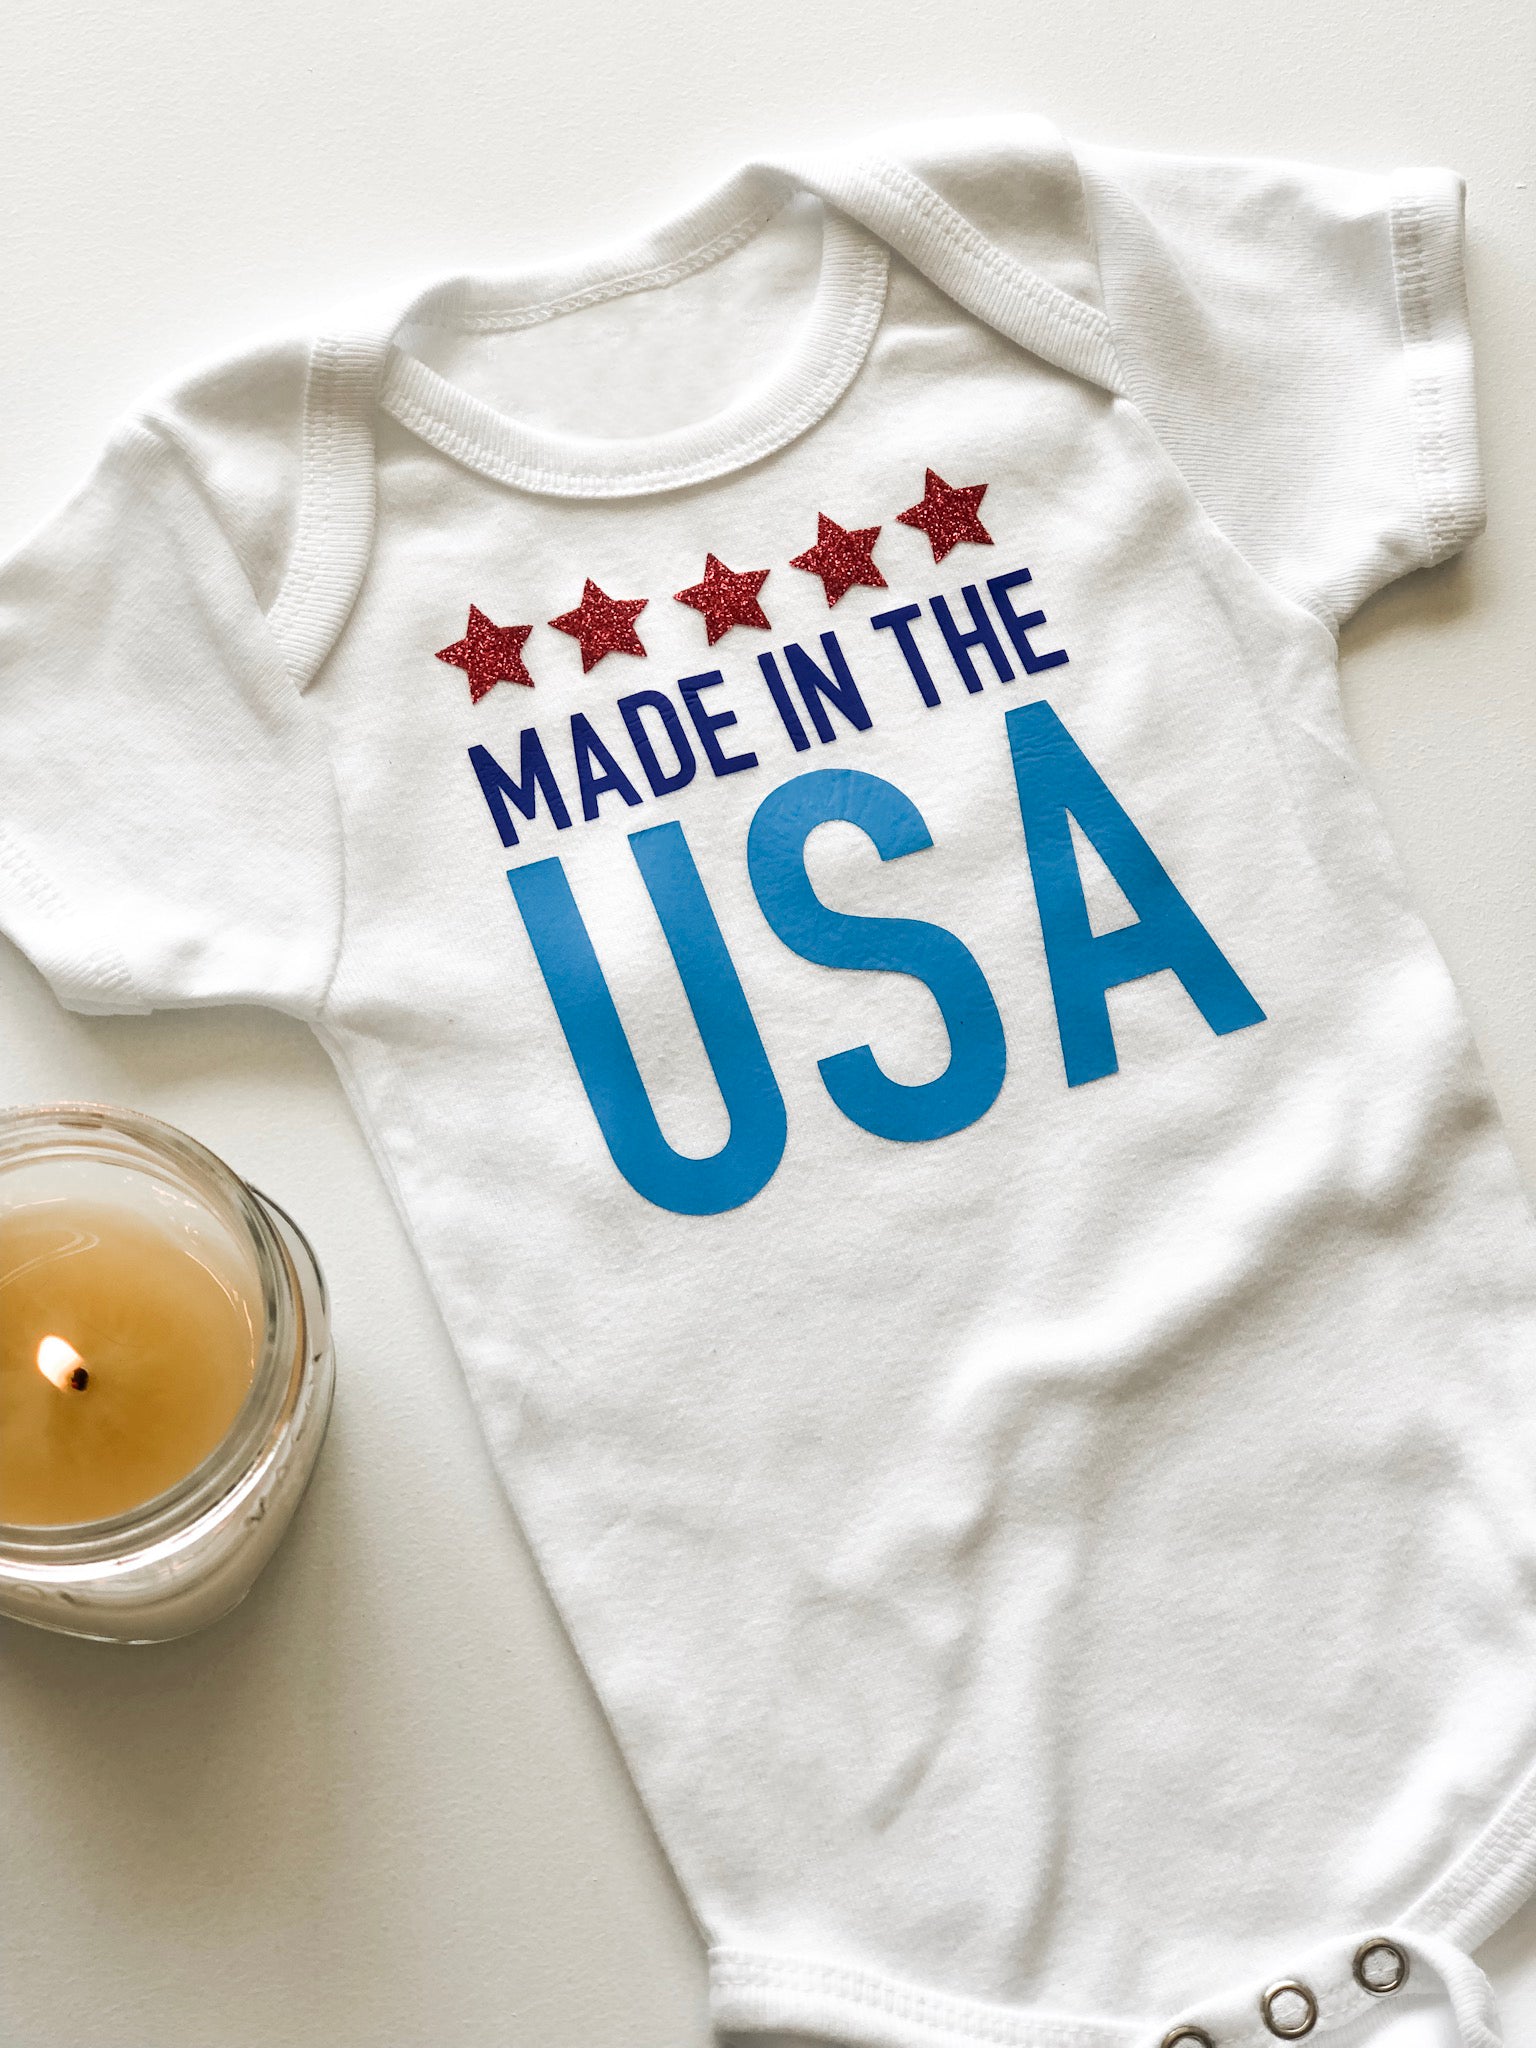 4th of July Baby Onesie with Cricut EasyPress2